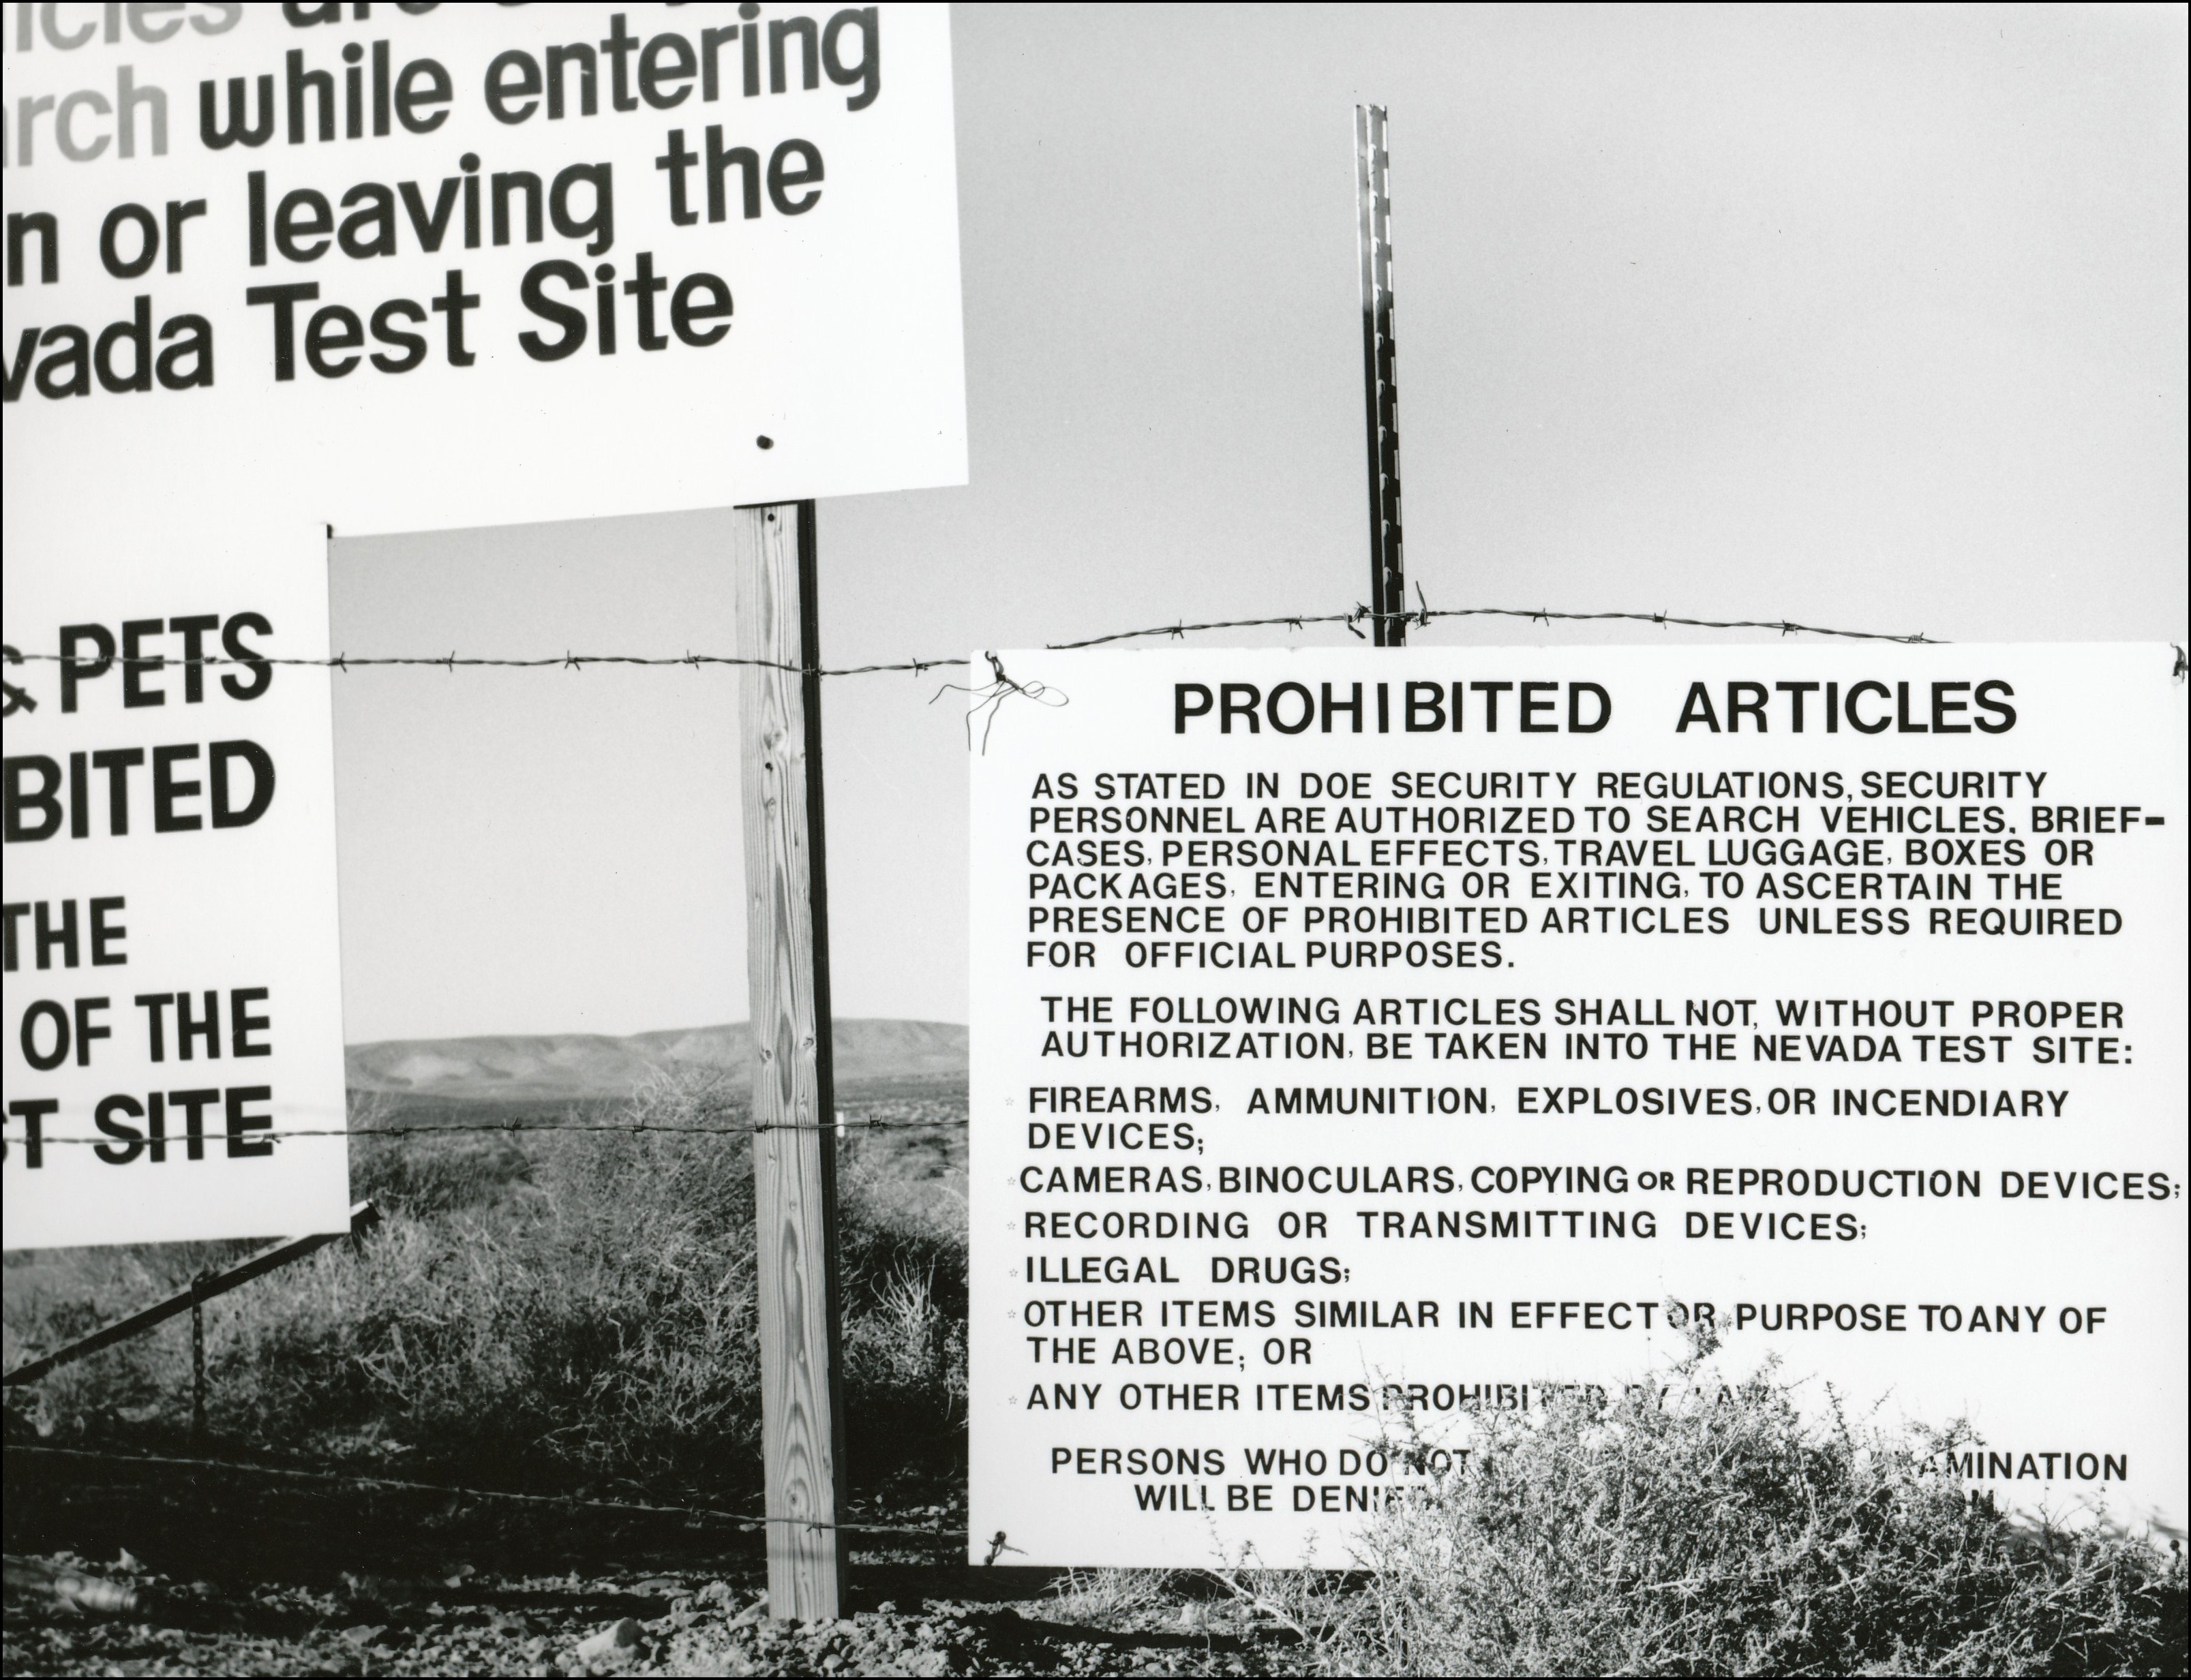 Warning signs for nuclear proving grounds hanging on fence